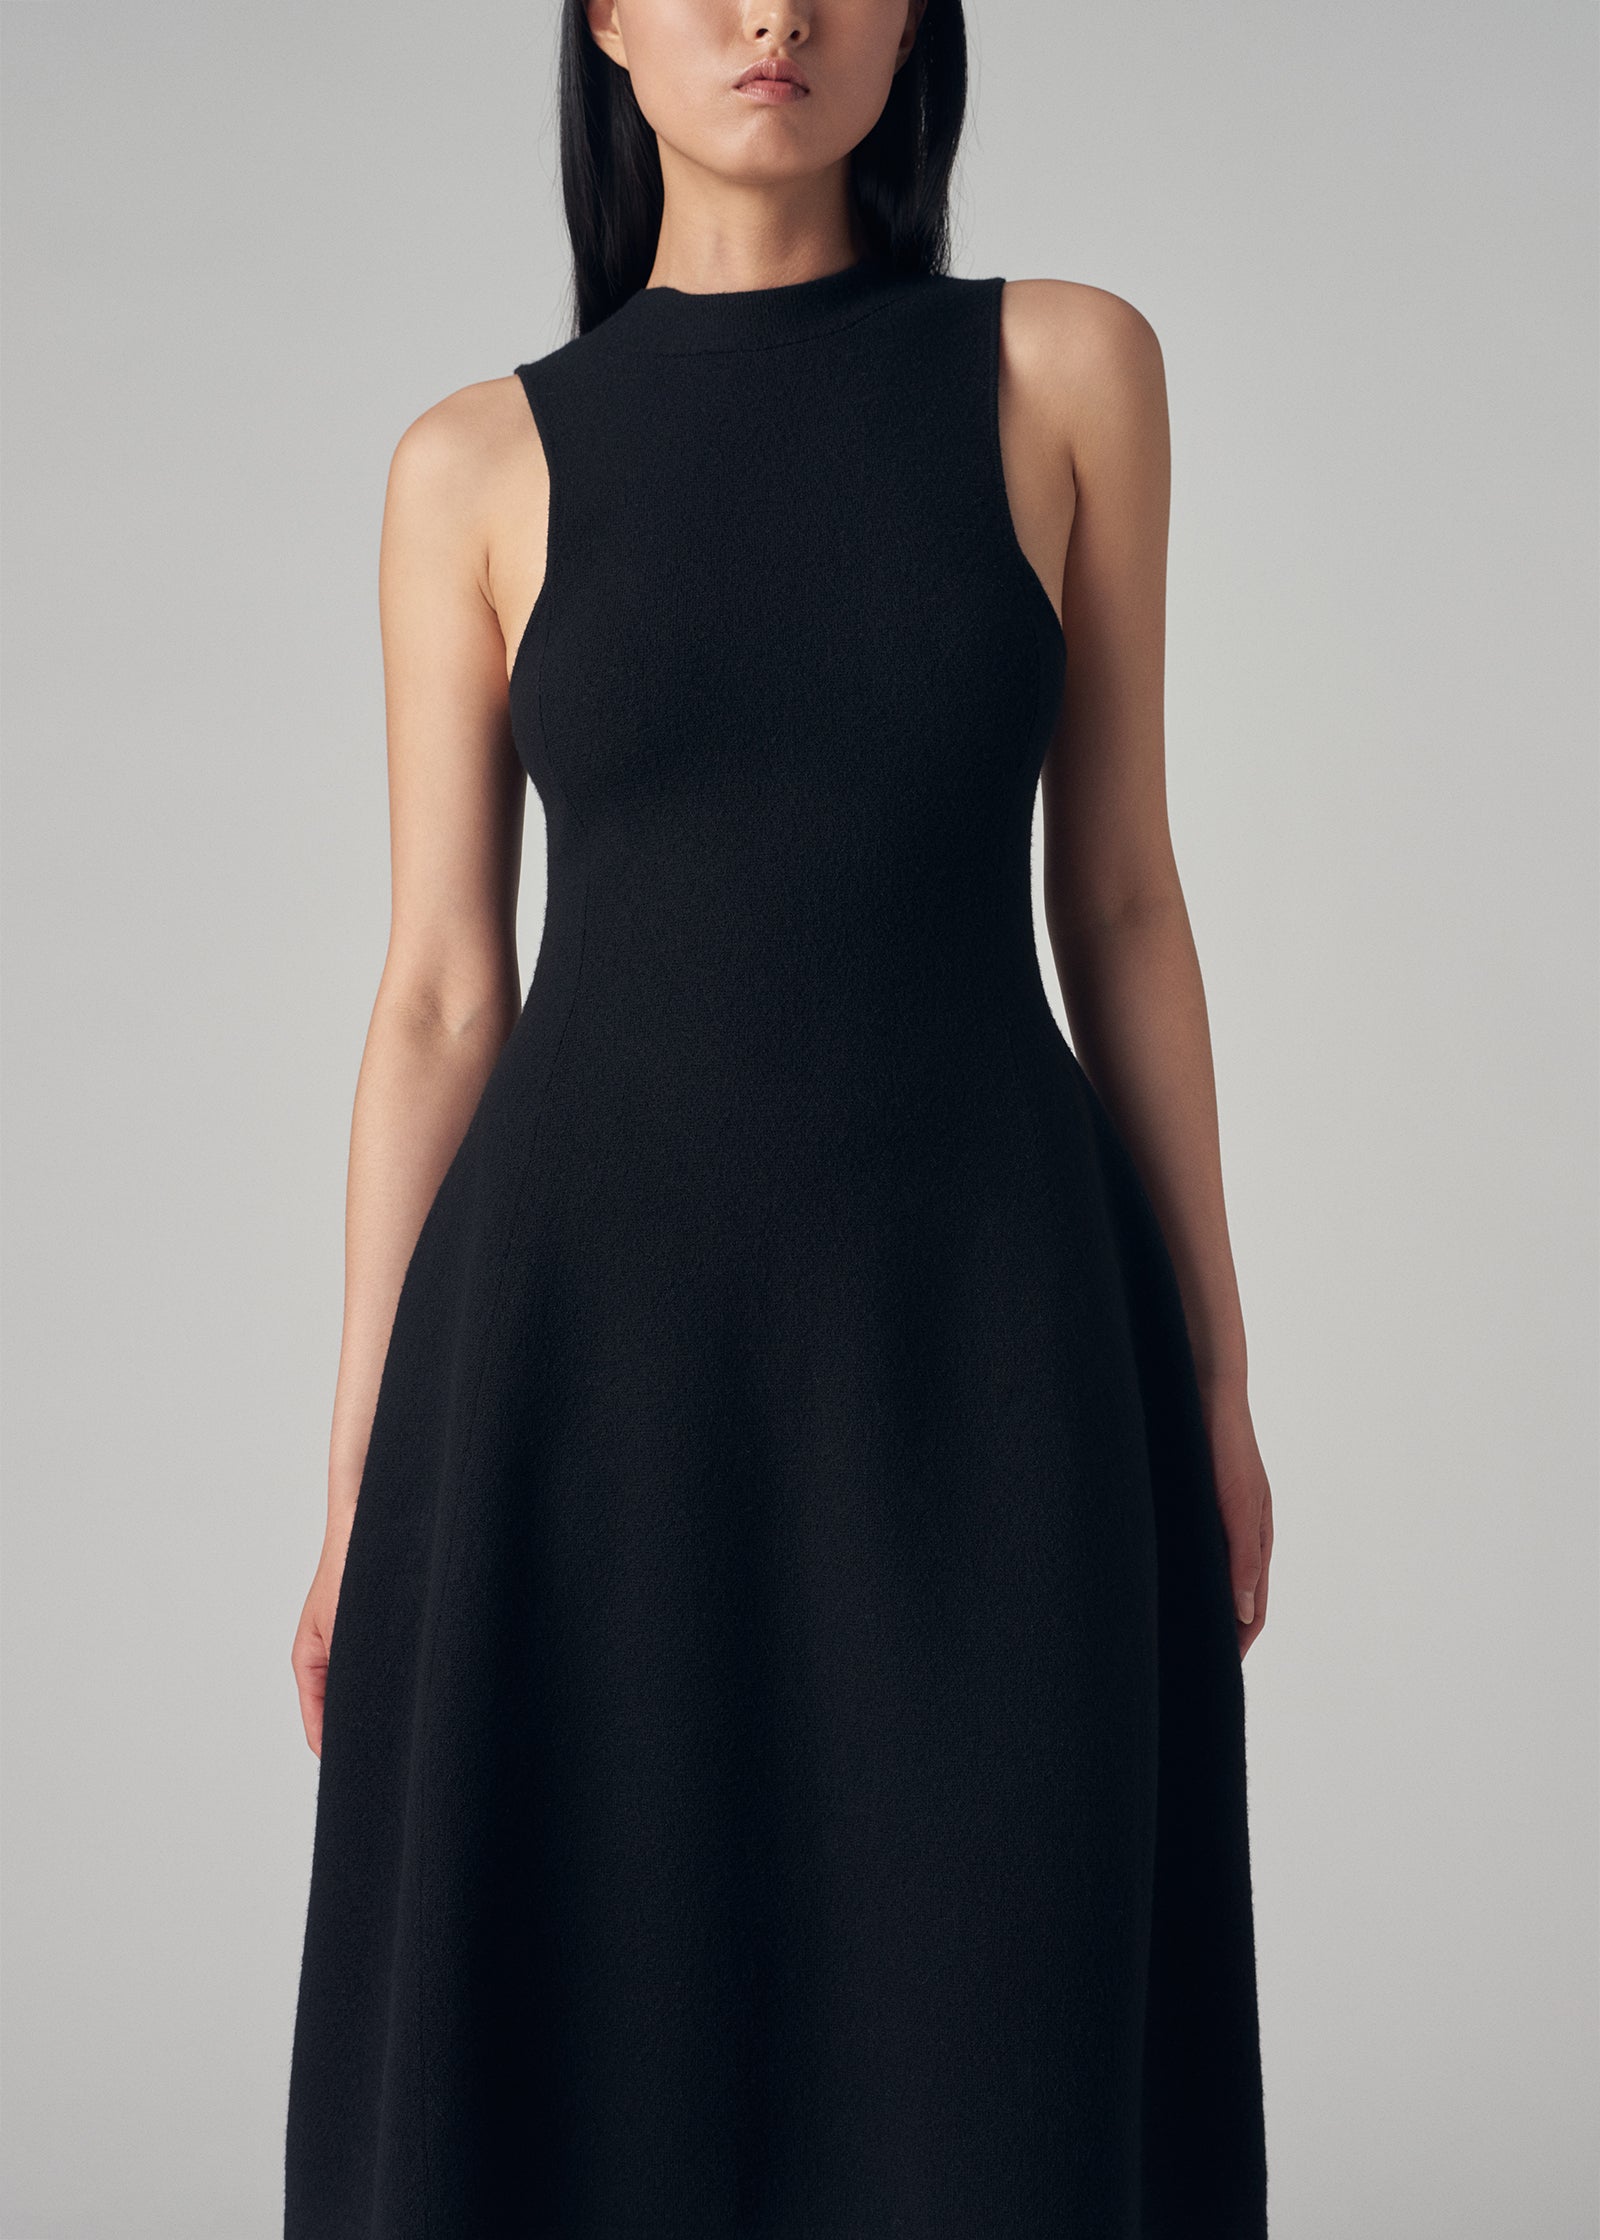 Compact Knit Dress in Merino Wool  - Black - CO Collections